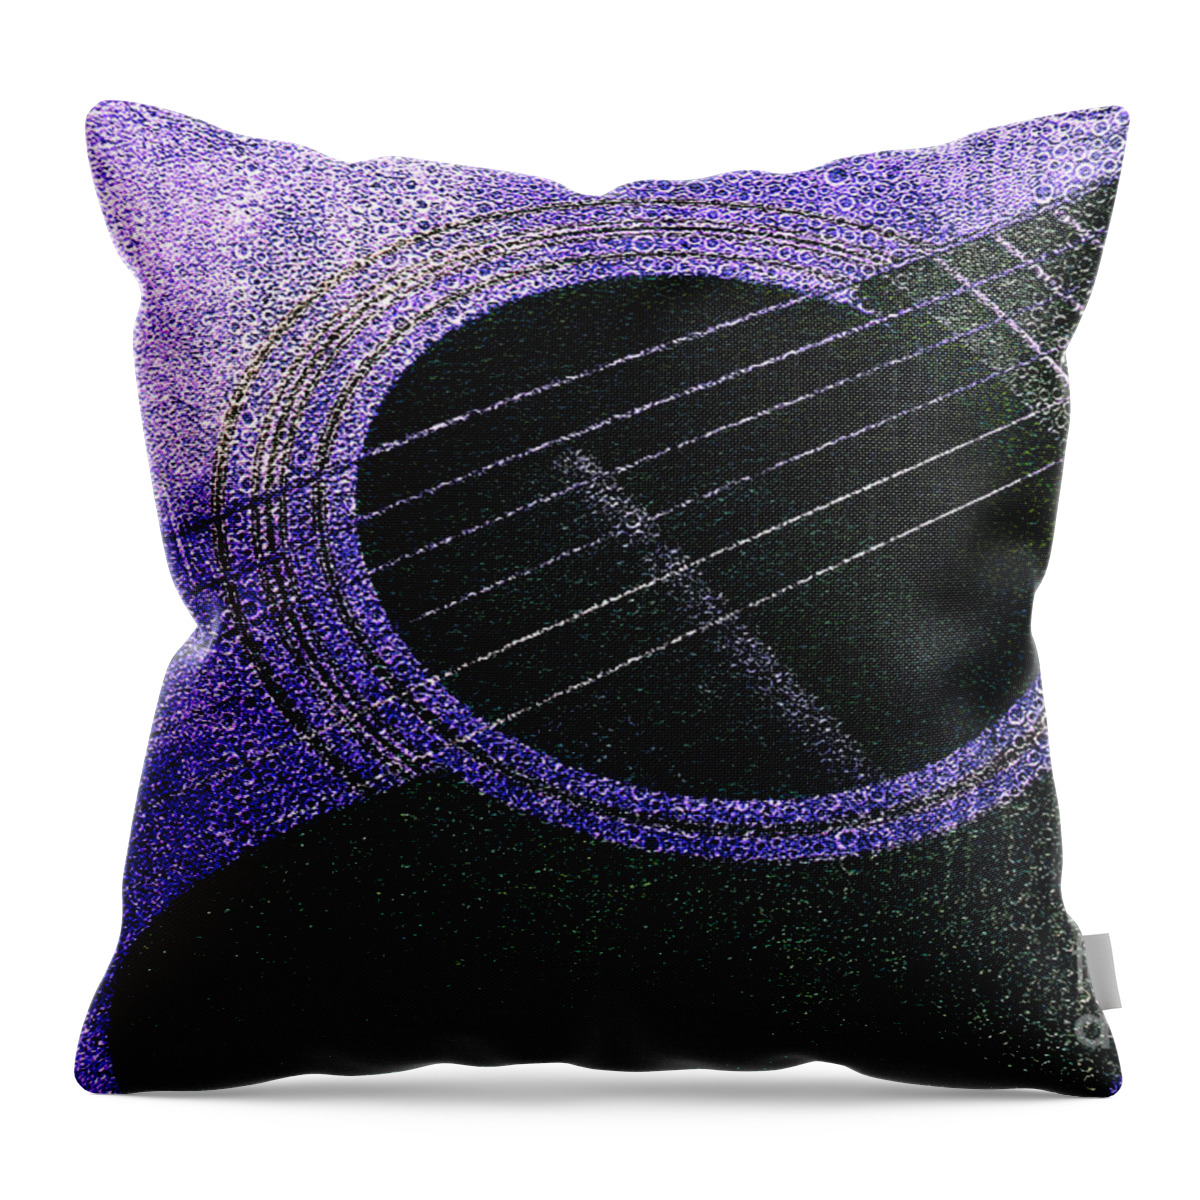 Andee Design Guitar Throw Pillow featuring the photograph Edgy Guitar Purple 2 by Andee Design